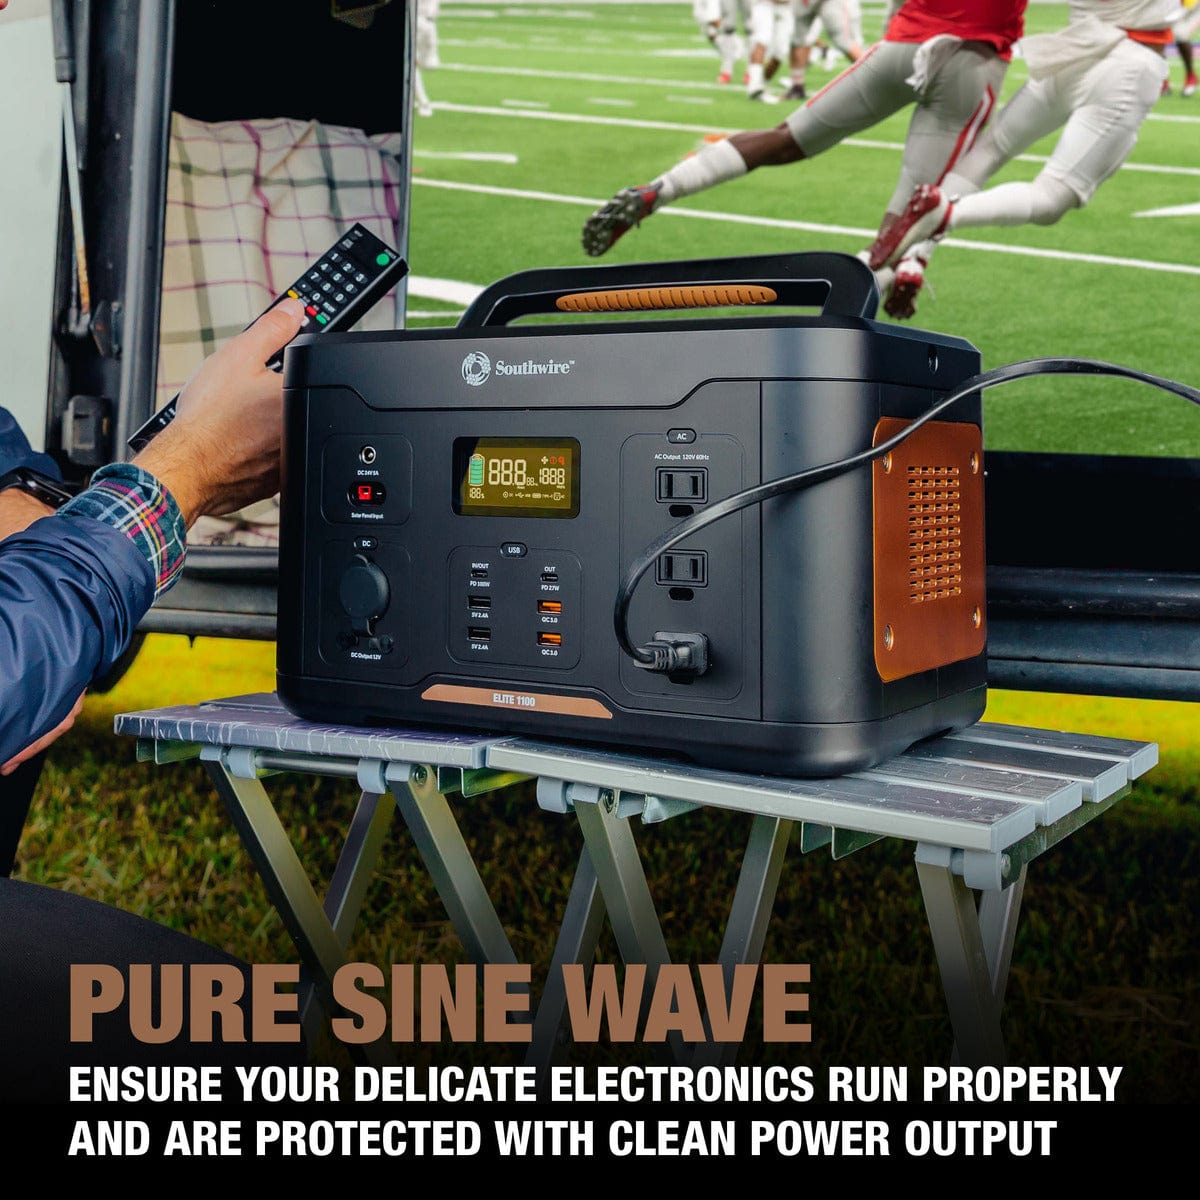 Southwire Power Supply Southwire Elite 1100 Series™ Portable Power Station - 53253